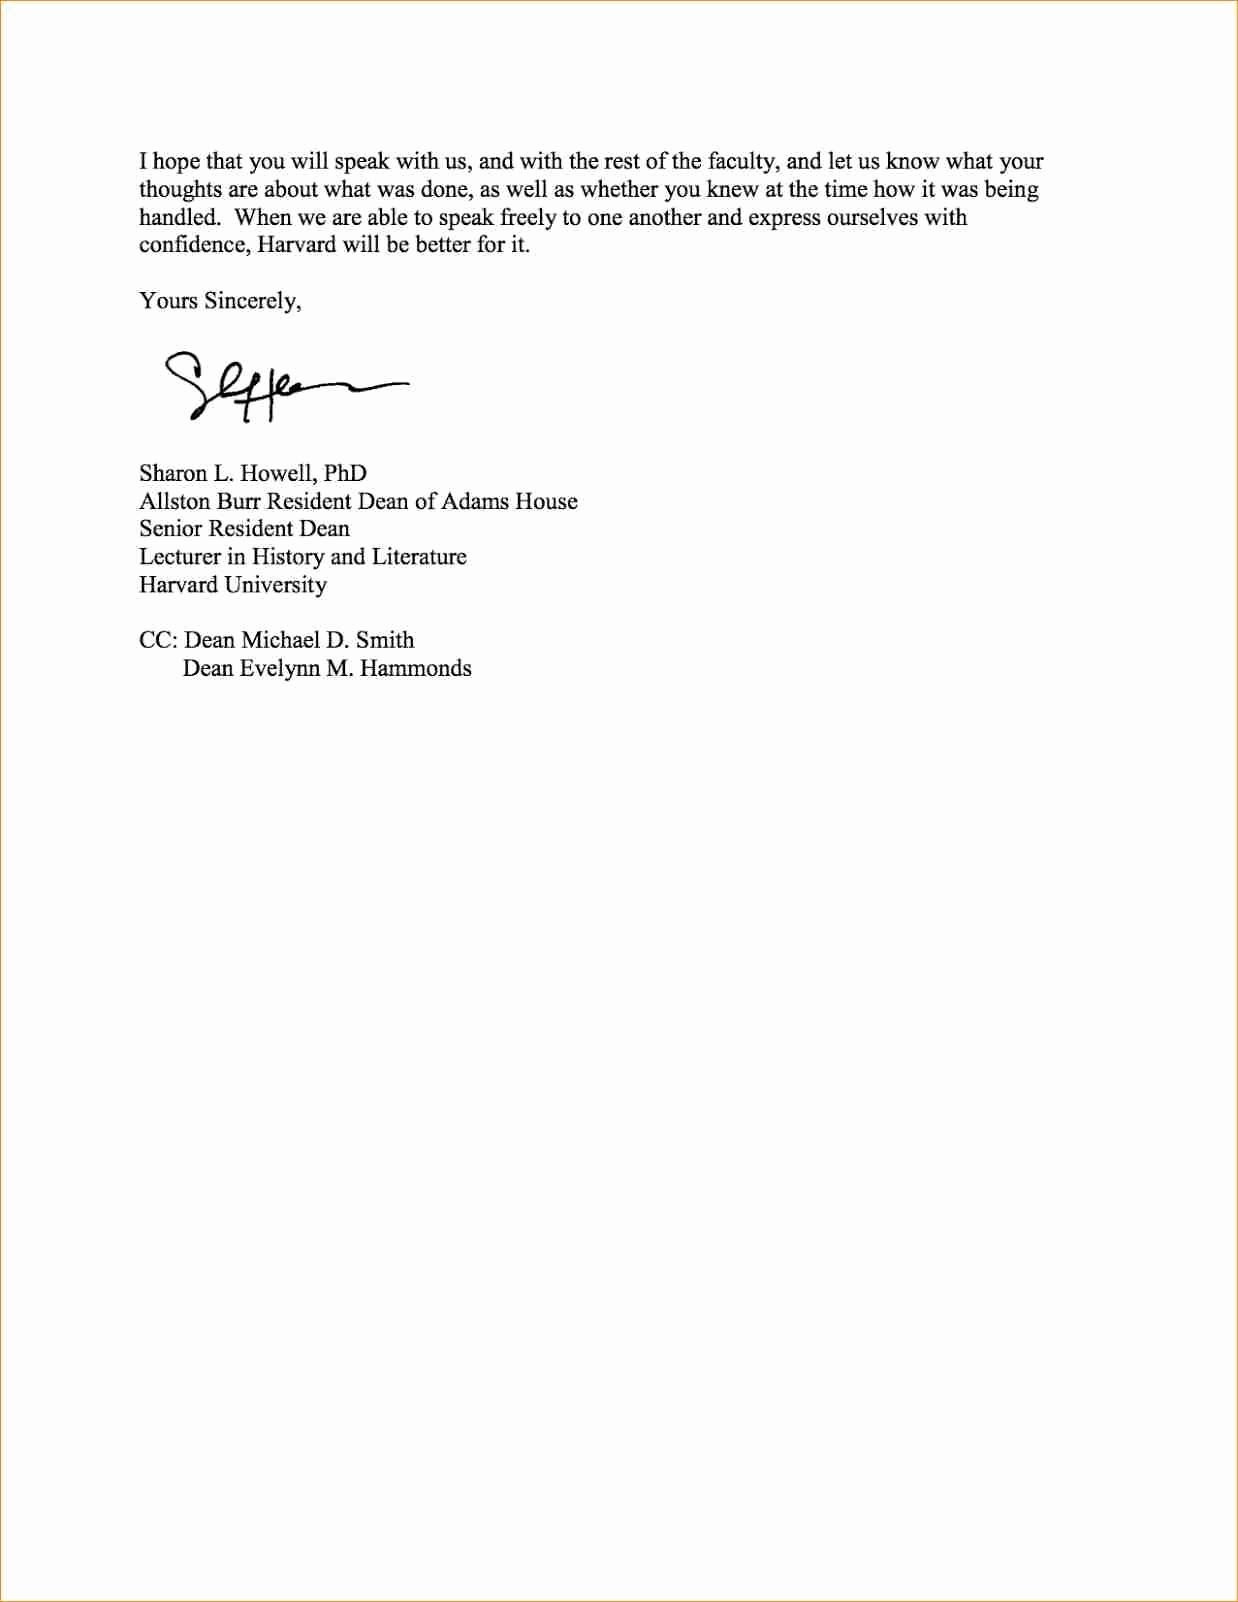 Two Weeks Notice Email Template Inspirational 2 Weeks Notice Email